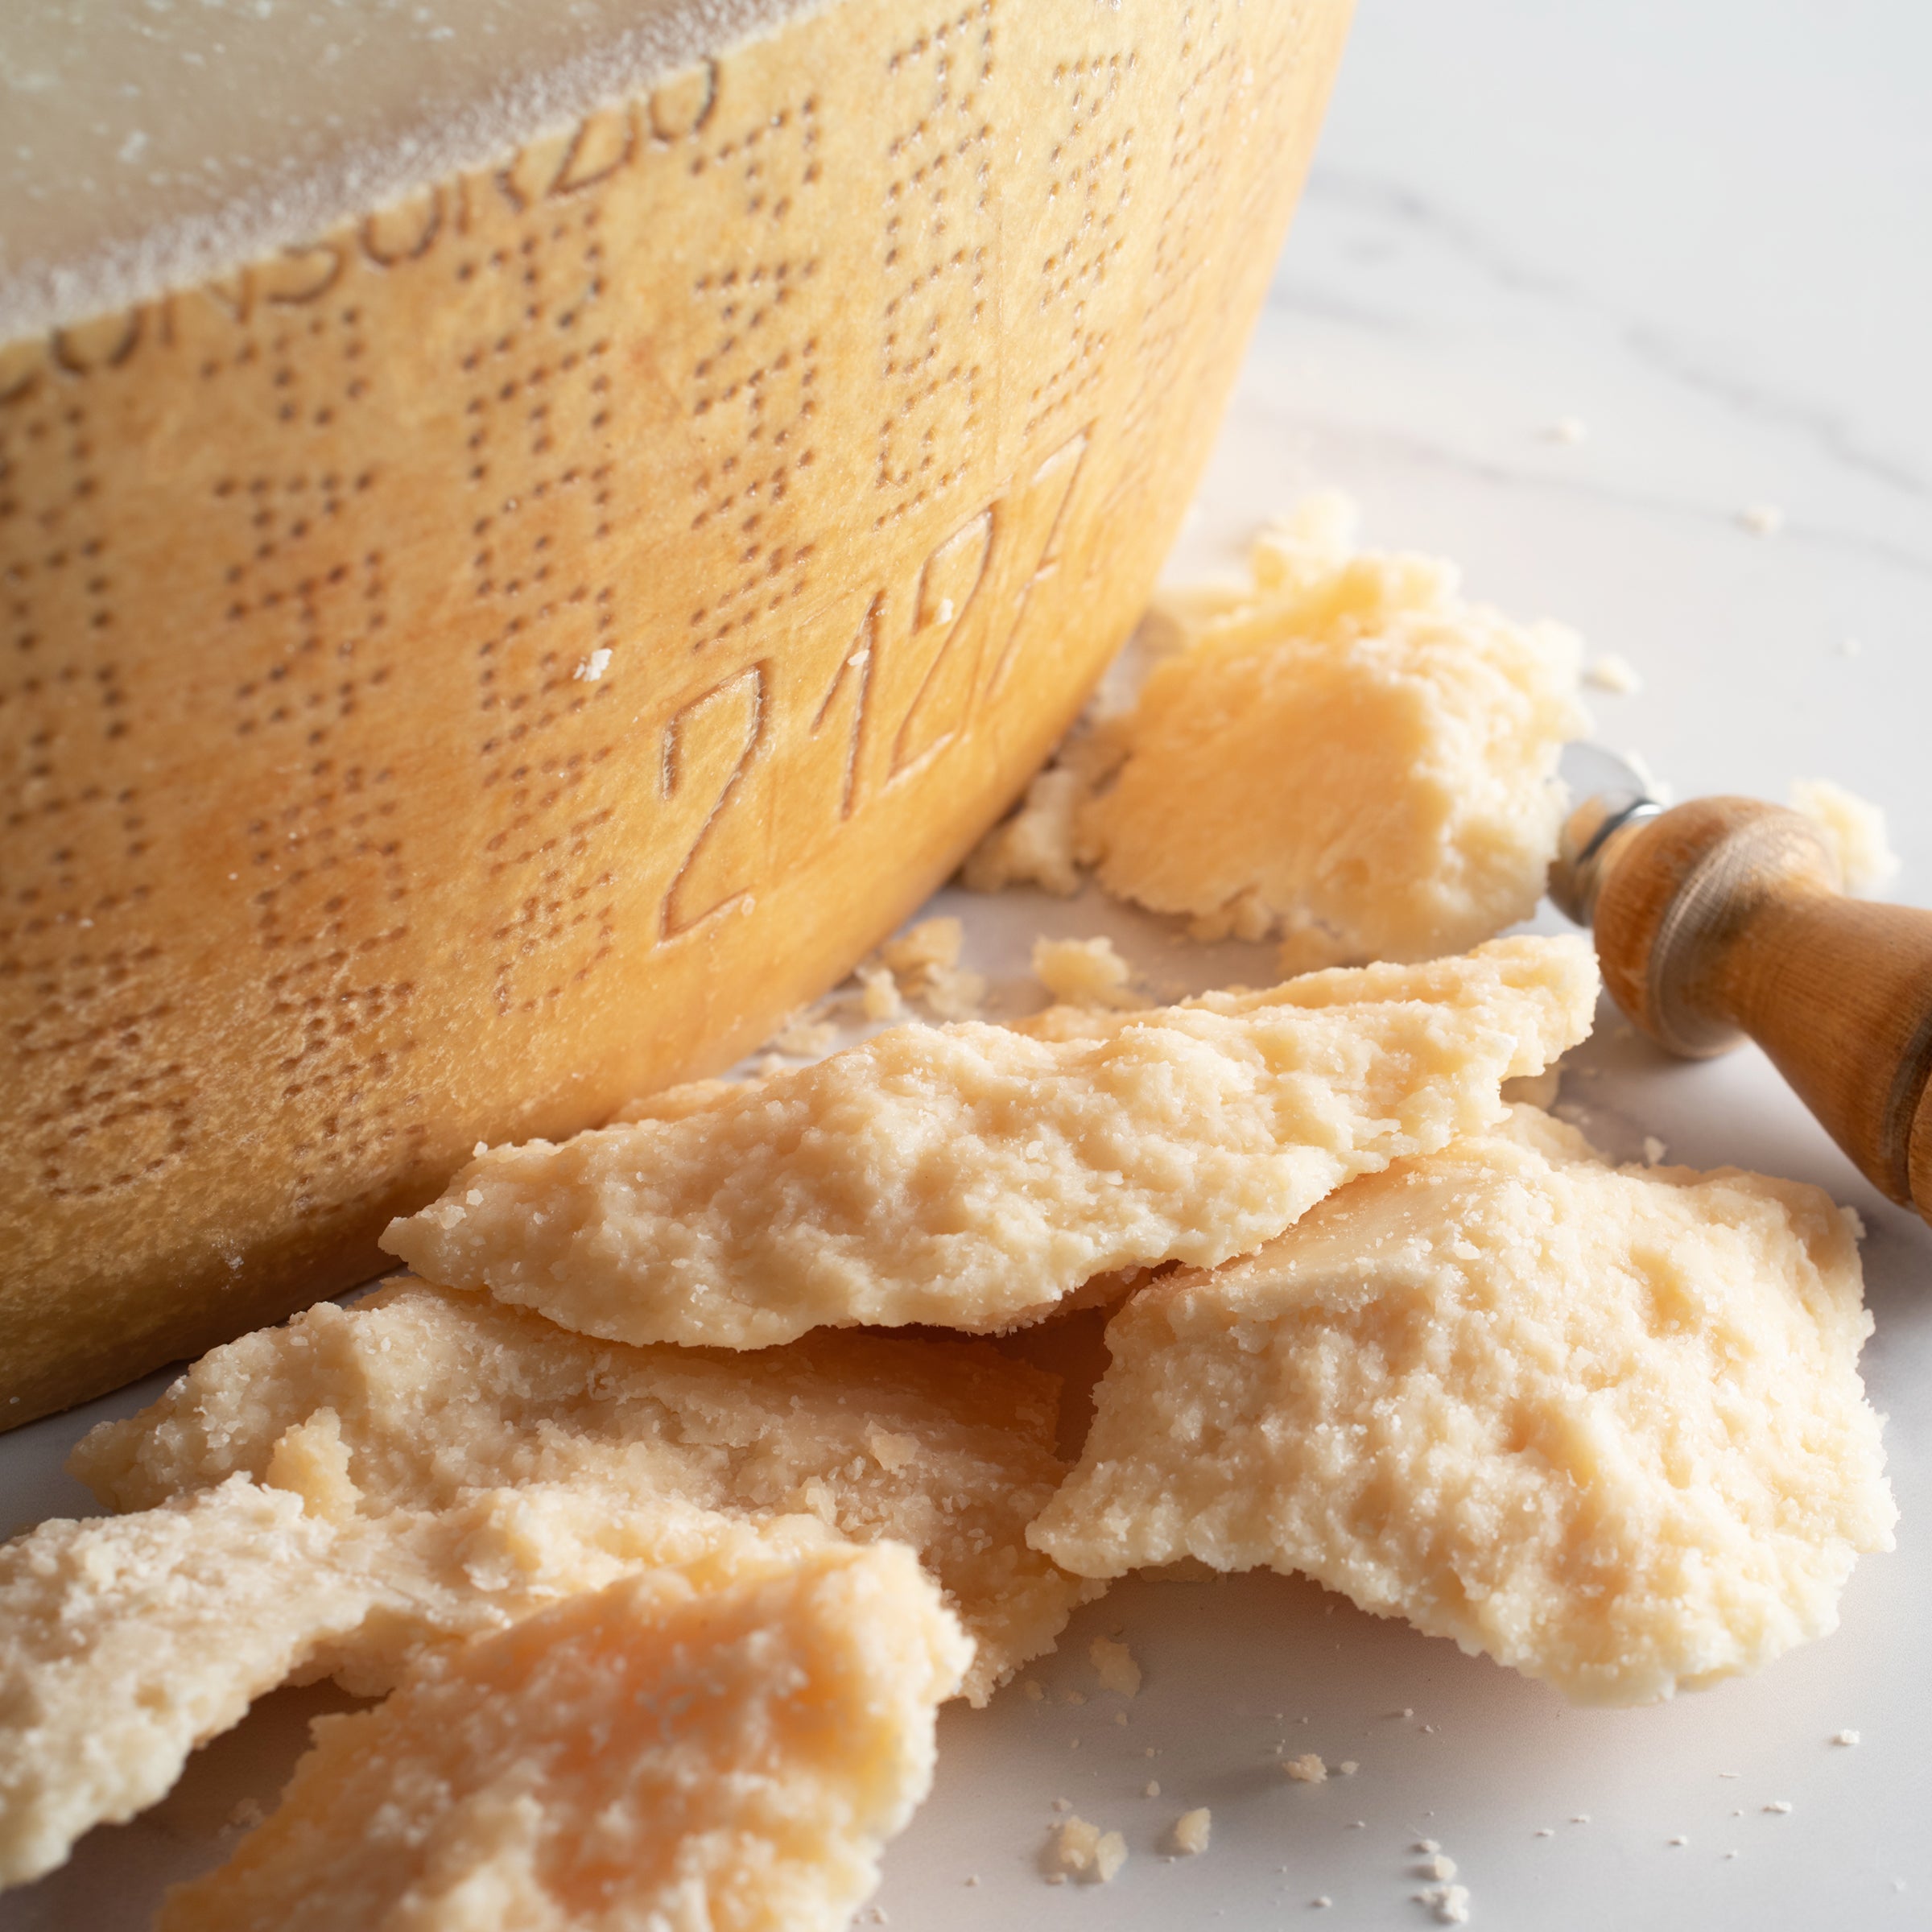 Is Domestic Parmesan Cheese Worth Using?